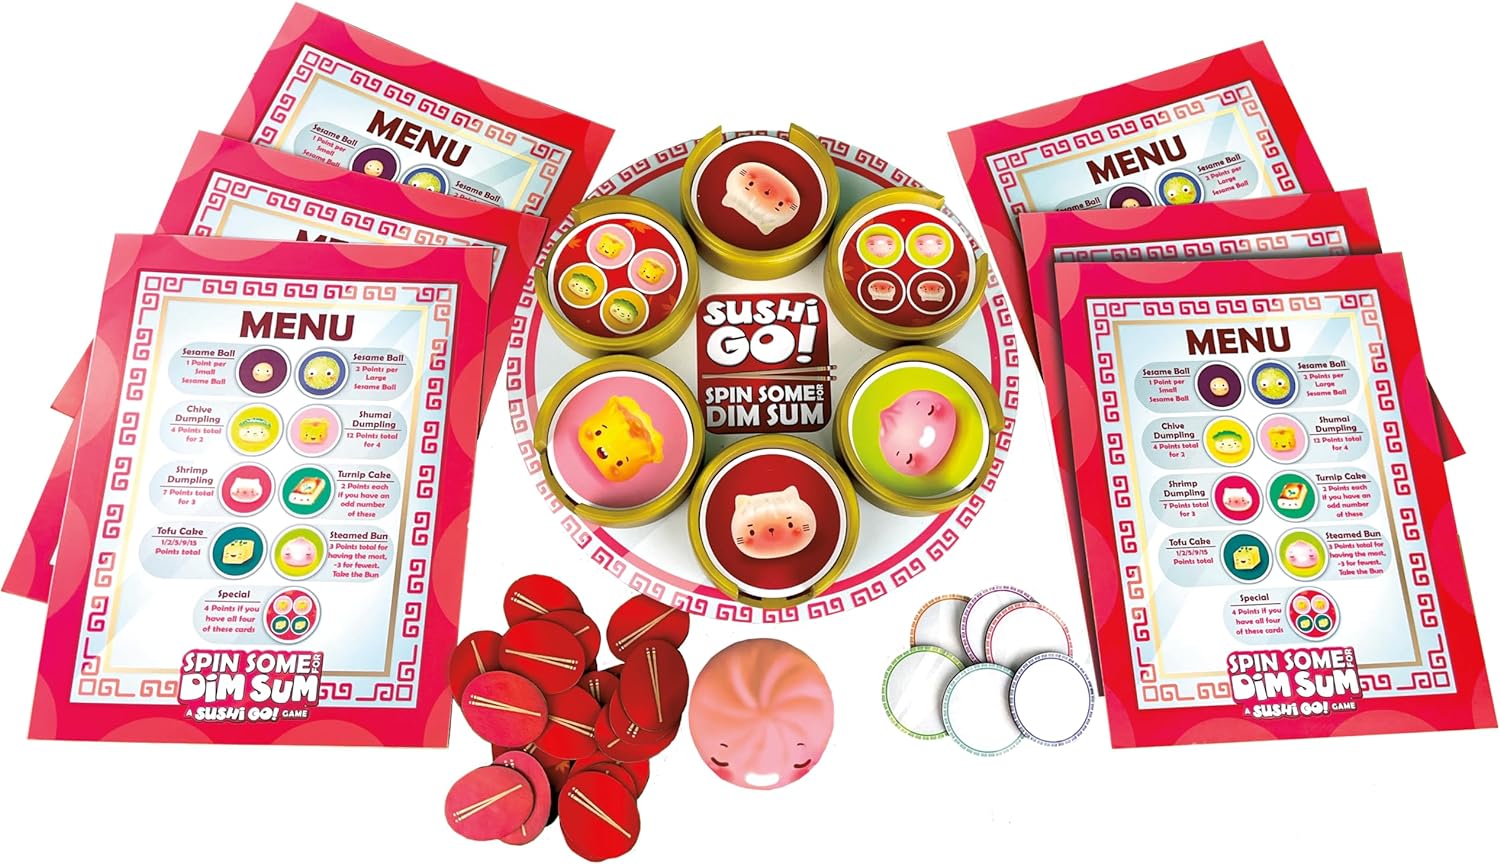 Sushi go! Spin Some for Dim Sum Game